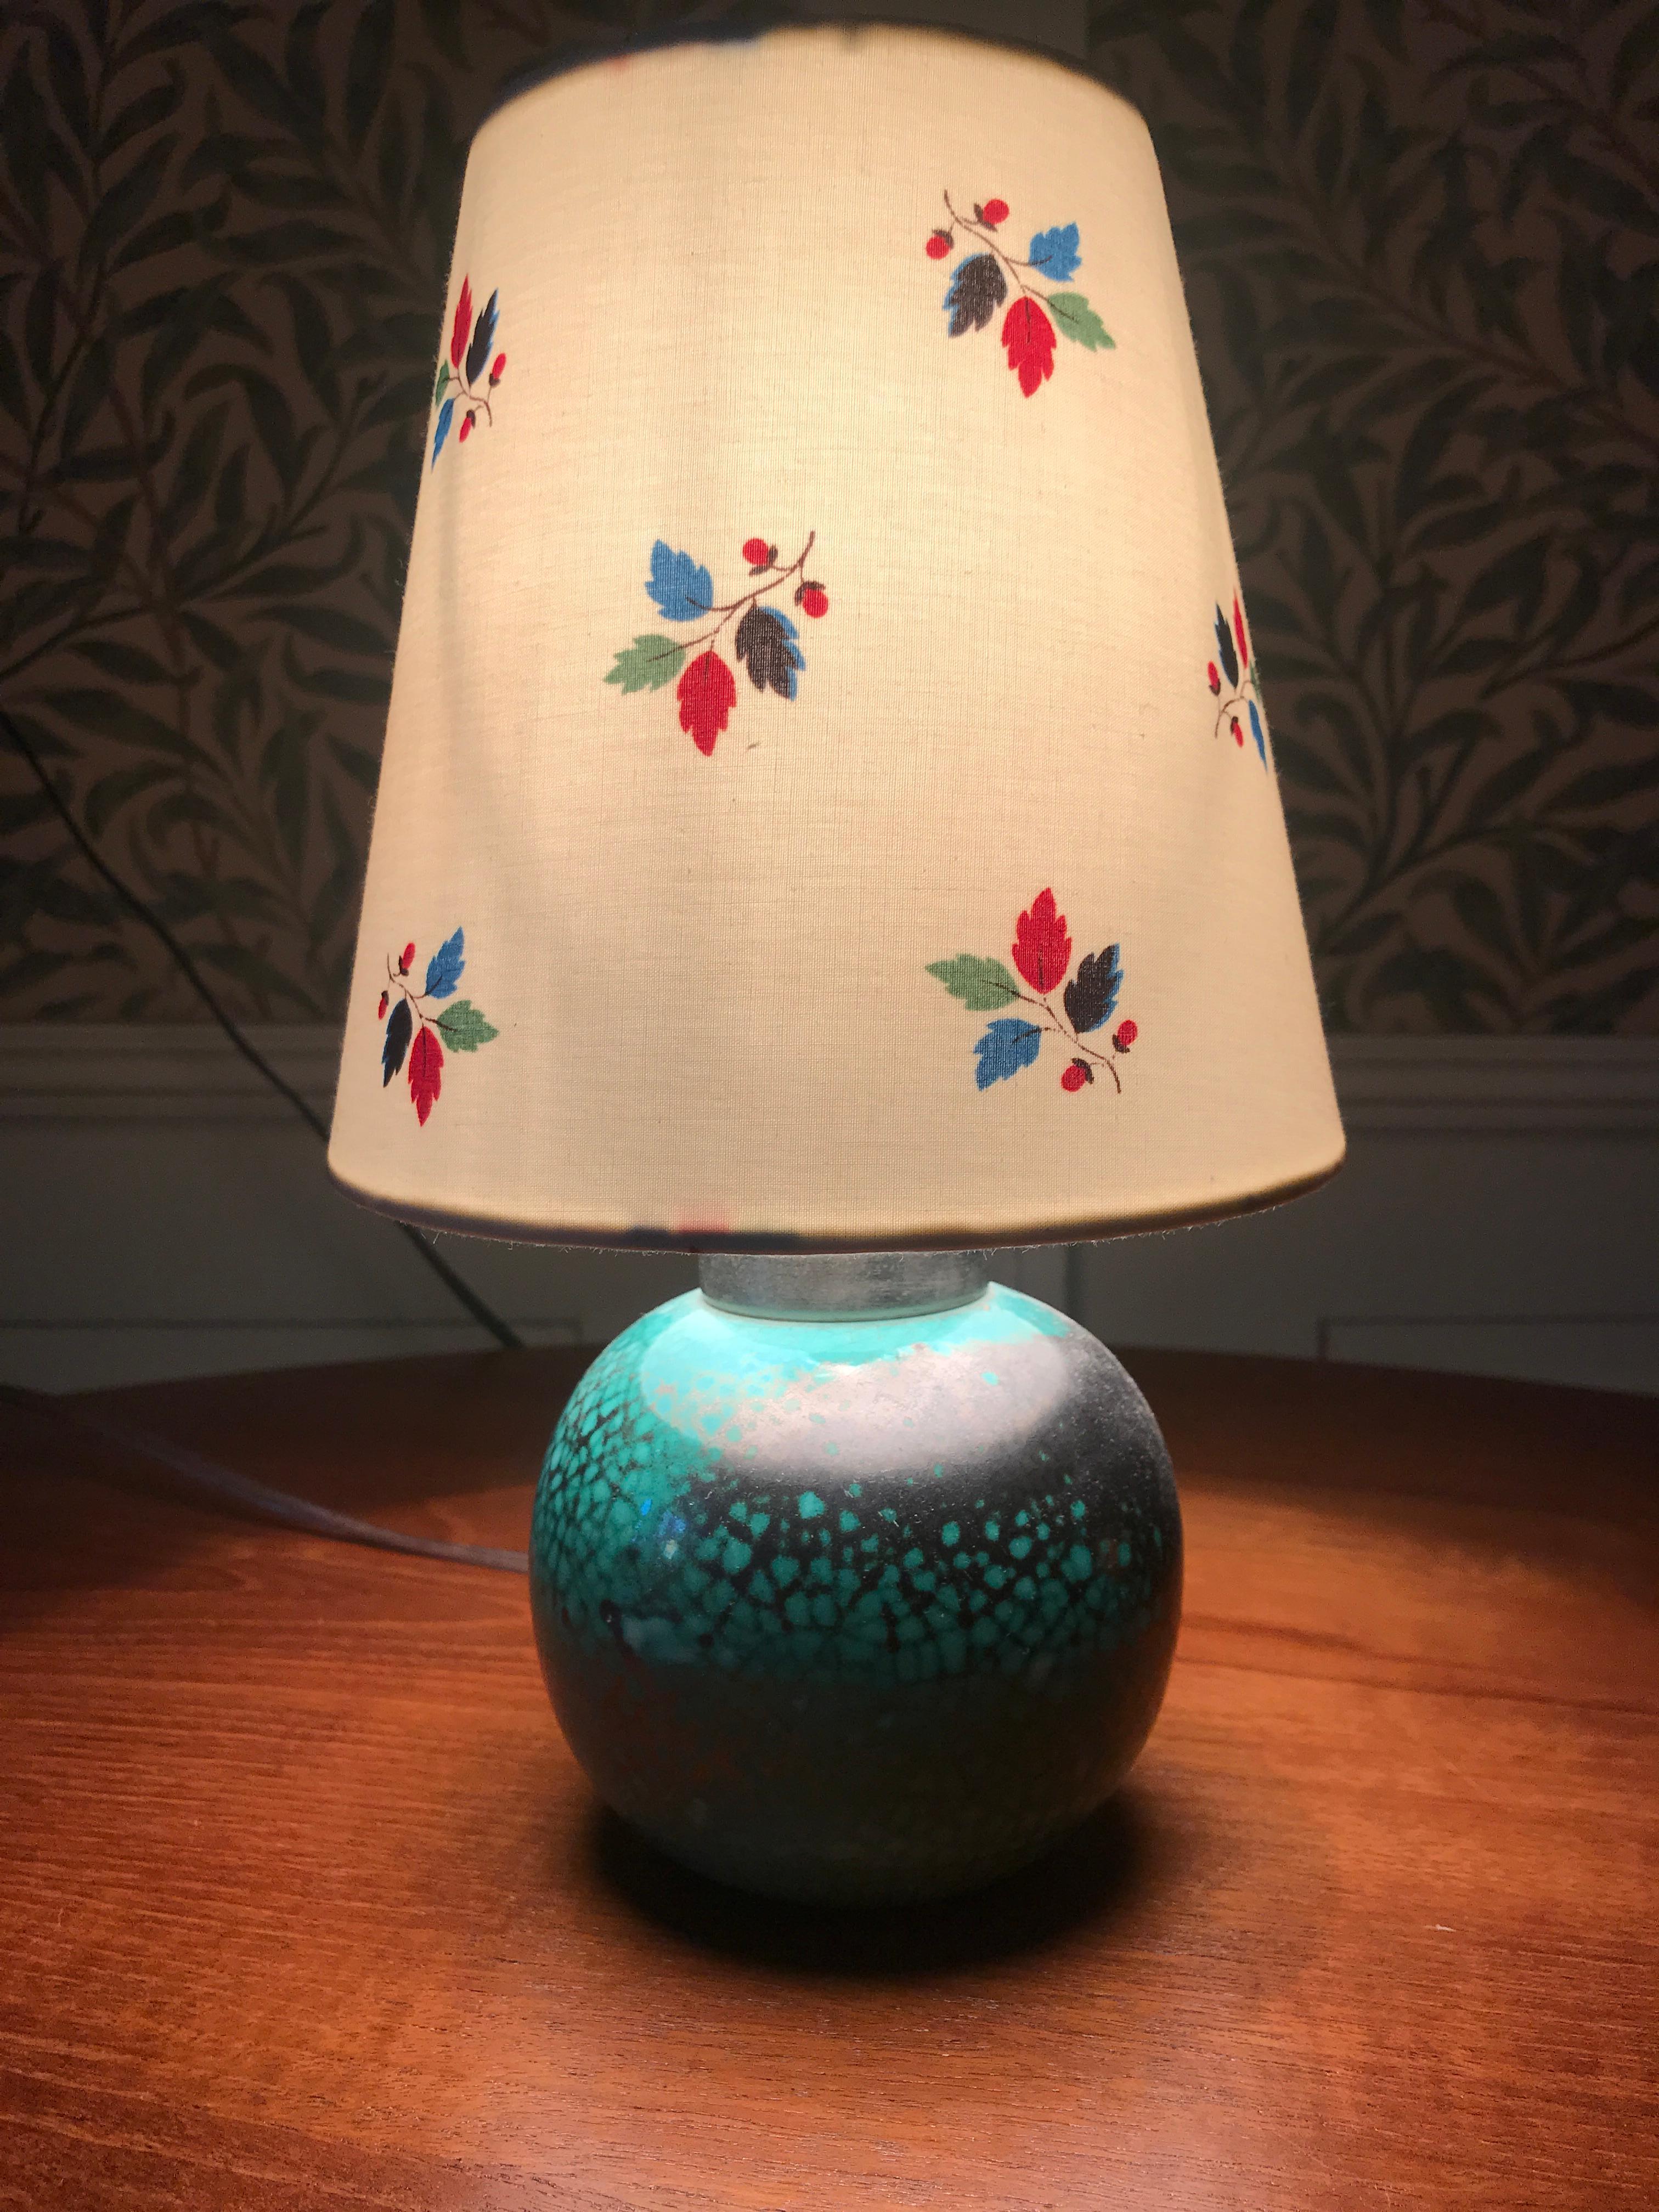 Lovely ceramic table lamp with turquoise crackled glaze and new lamp shade.